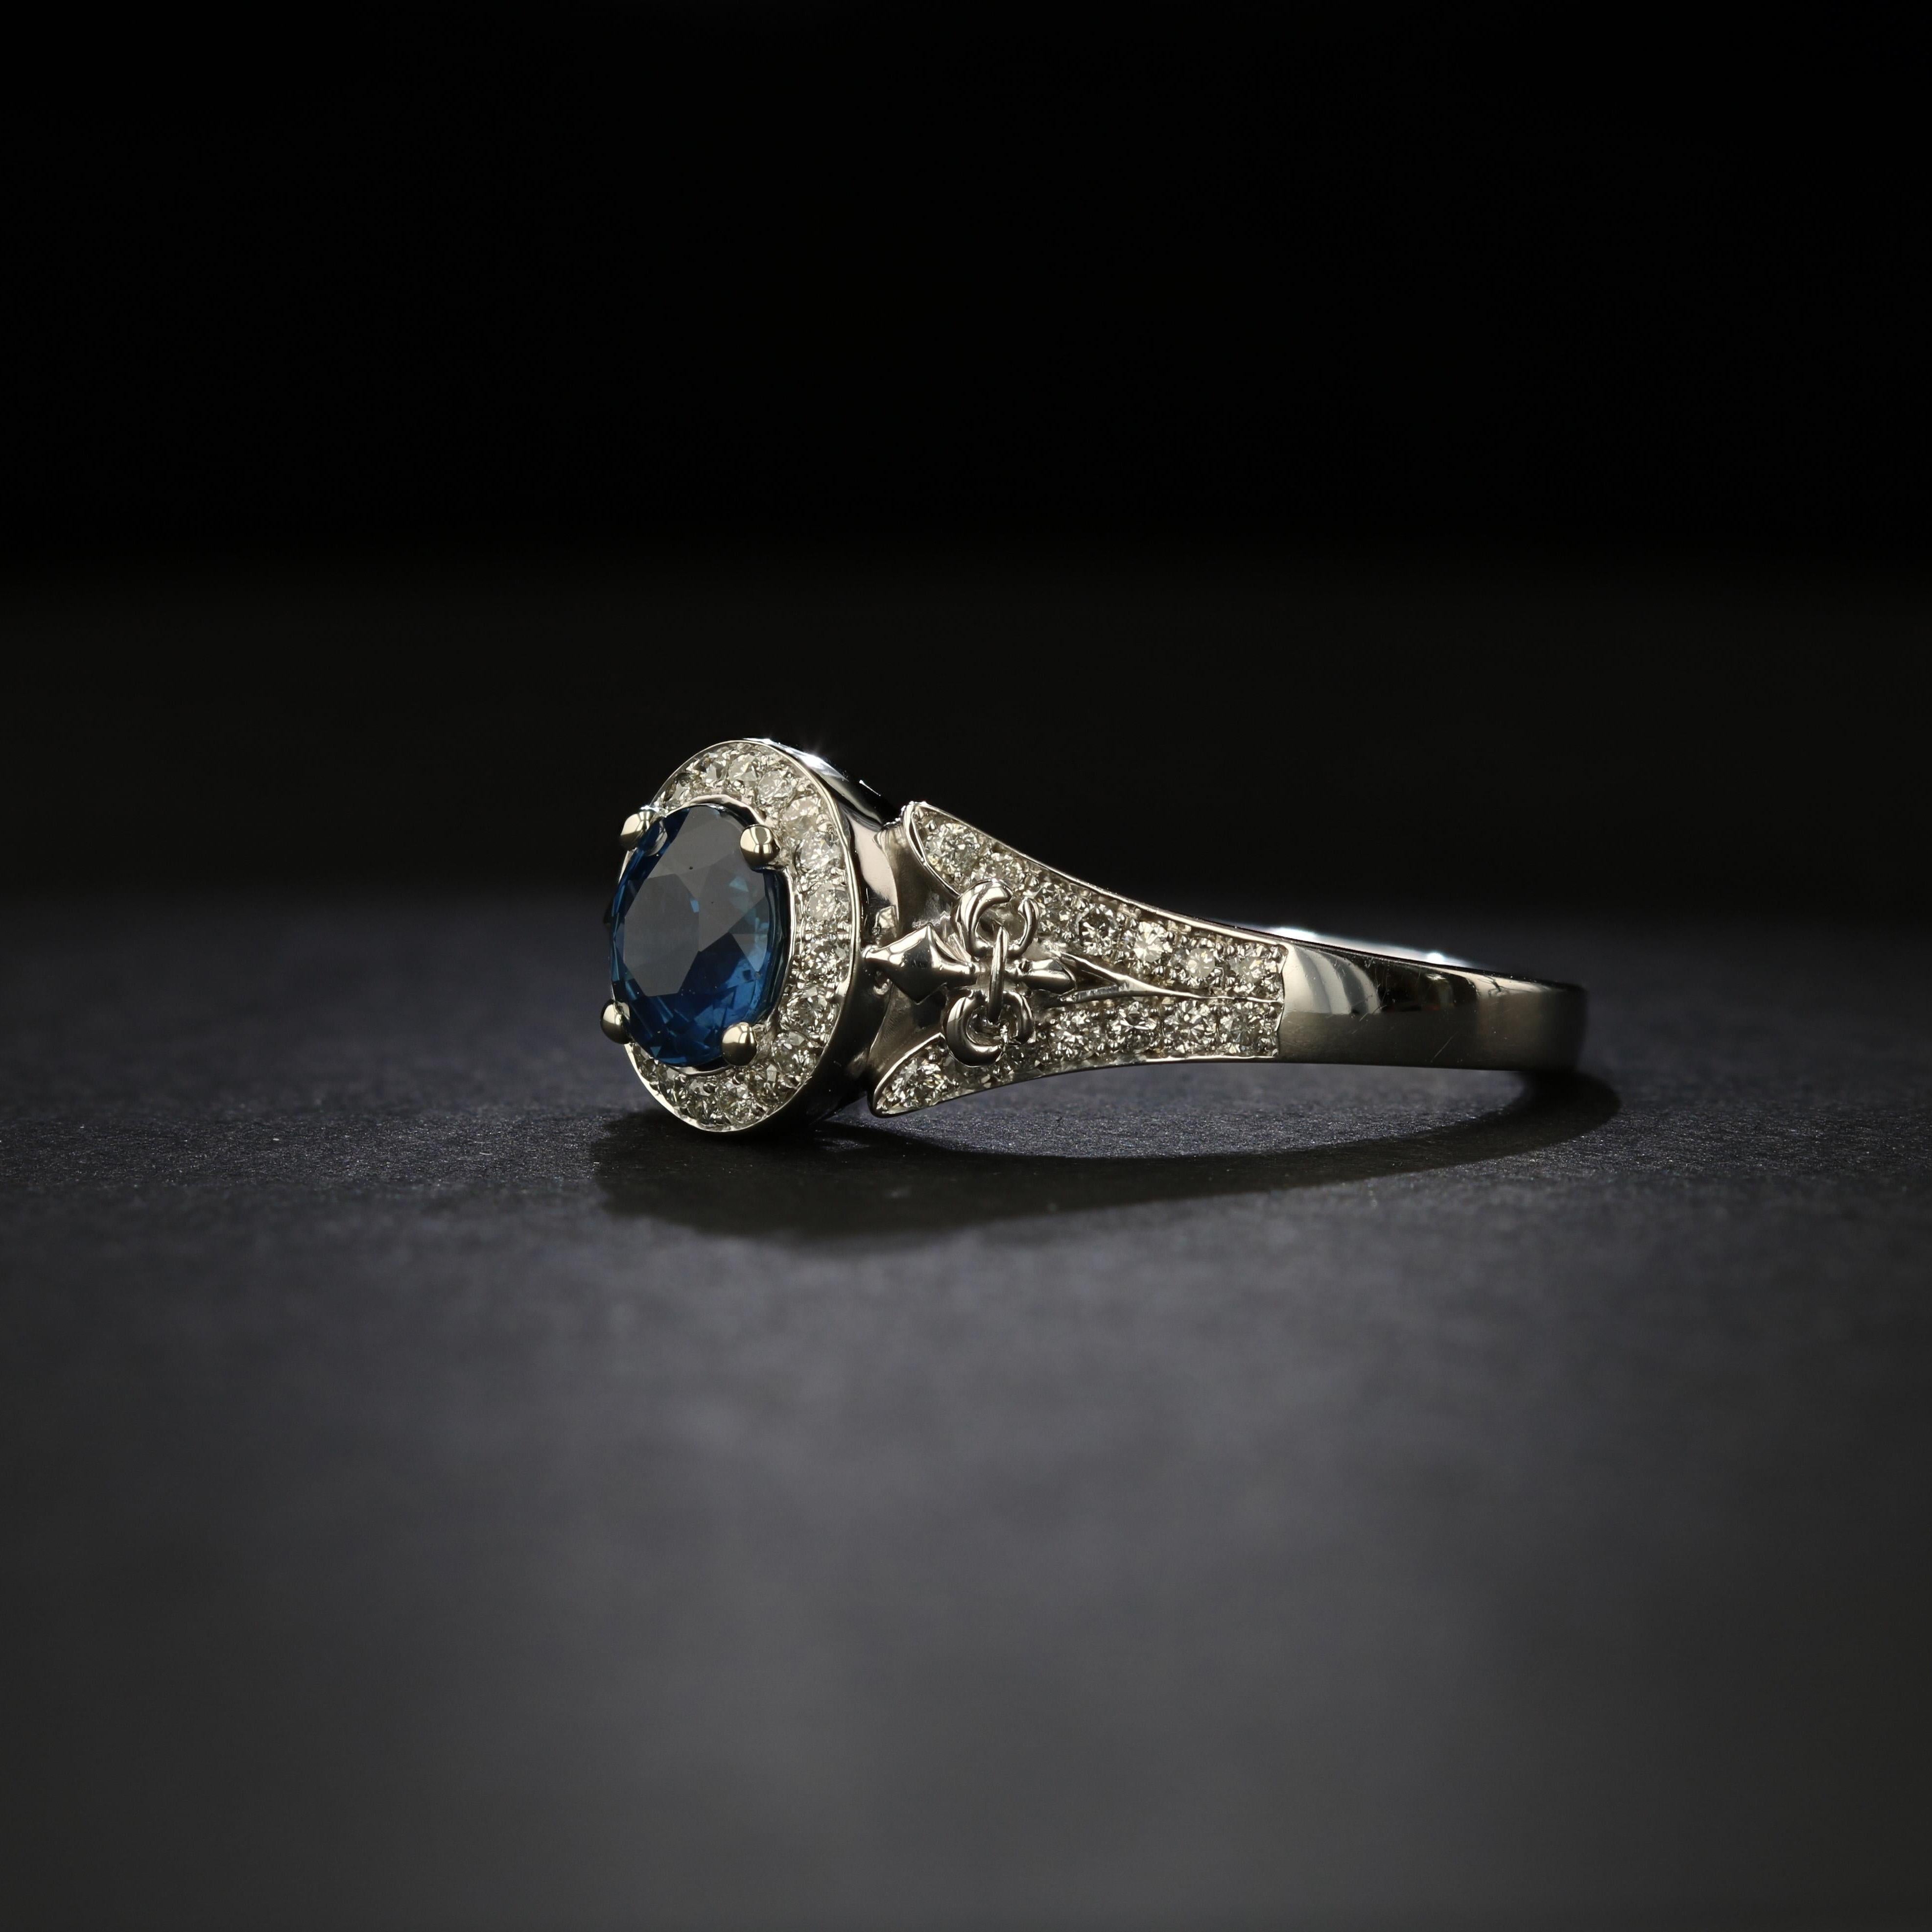 Women's Round-Cut Sapphire Ring with Diamond Halo and Details